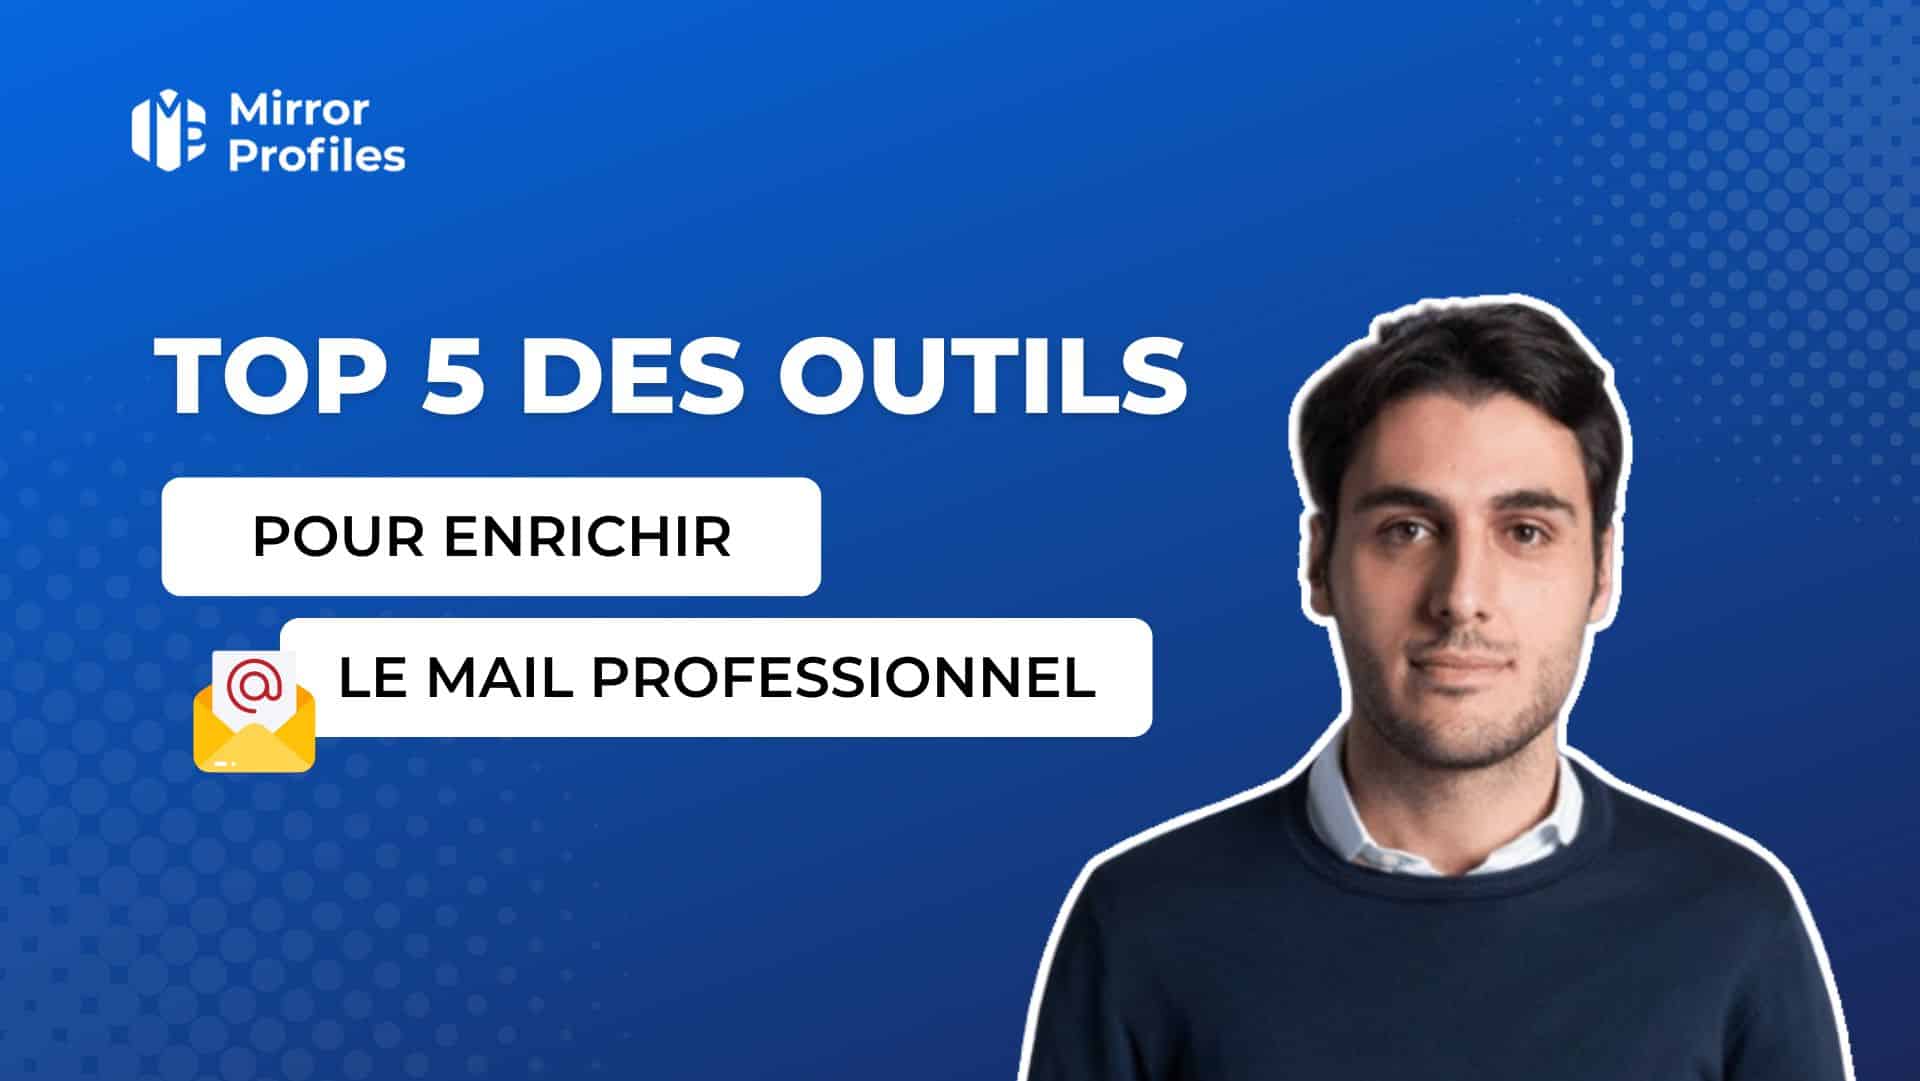 Image featuring a man against a blue background, with text that reads "Top 5 tools to enrich professional mail" and the Mirror Profiles logo. An email icon is also present.